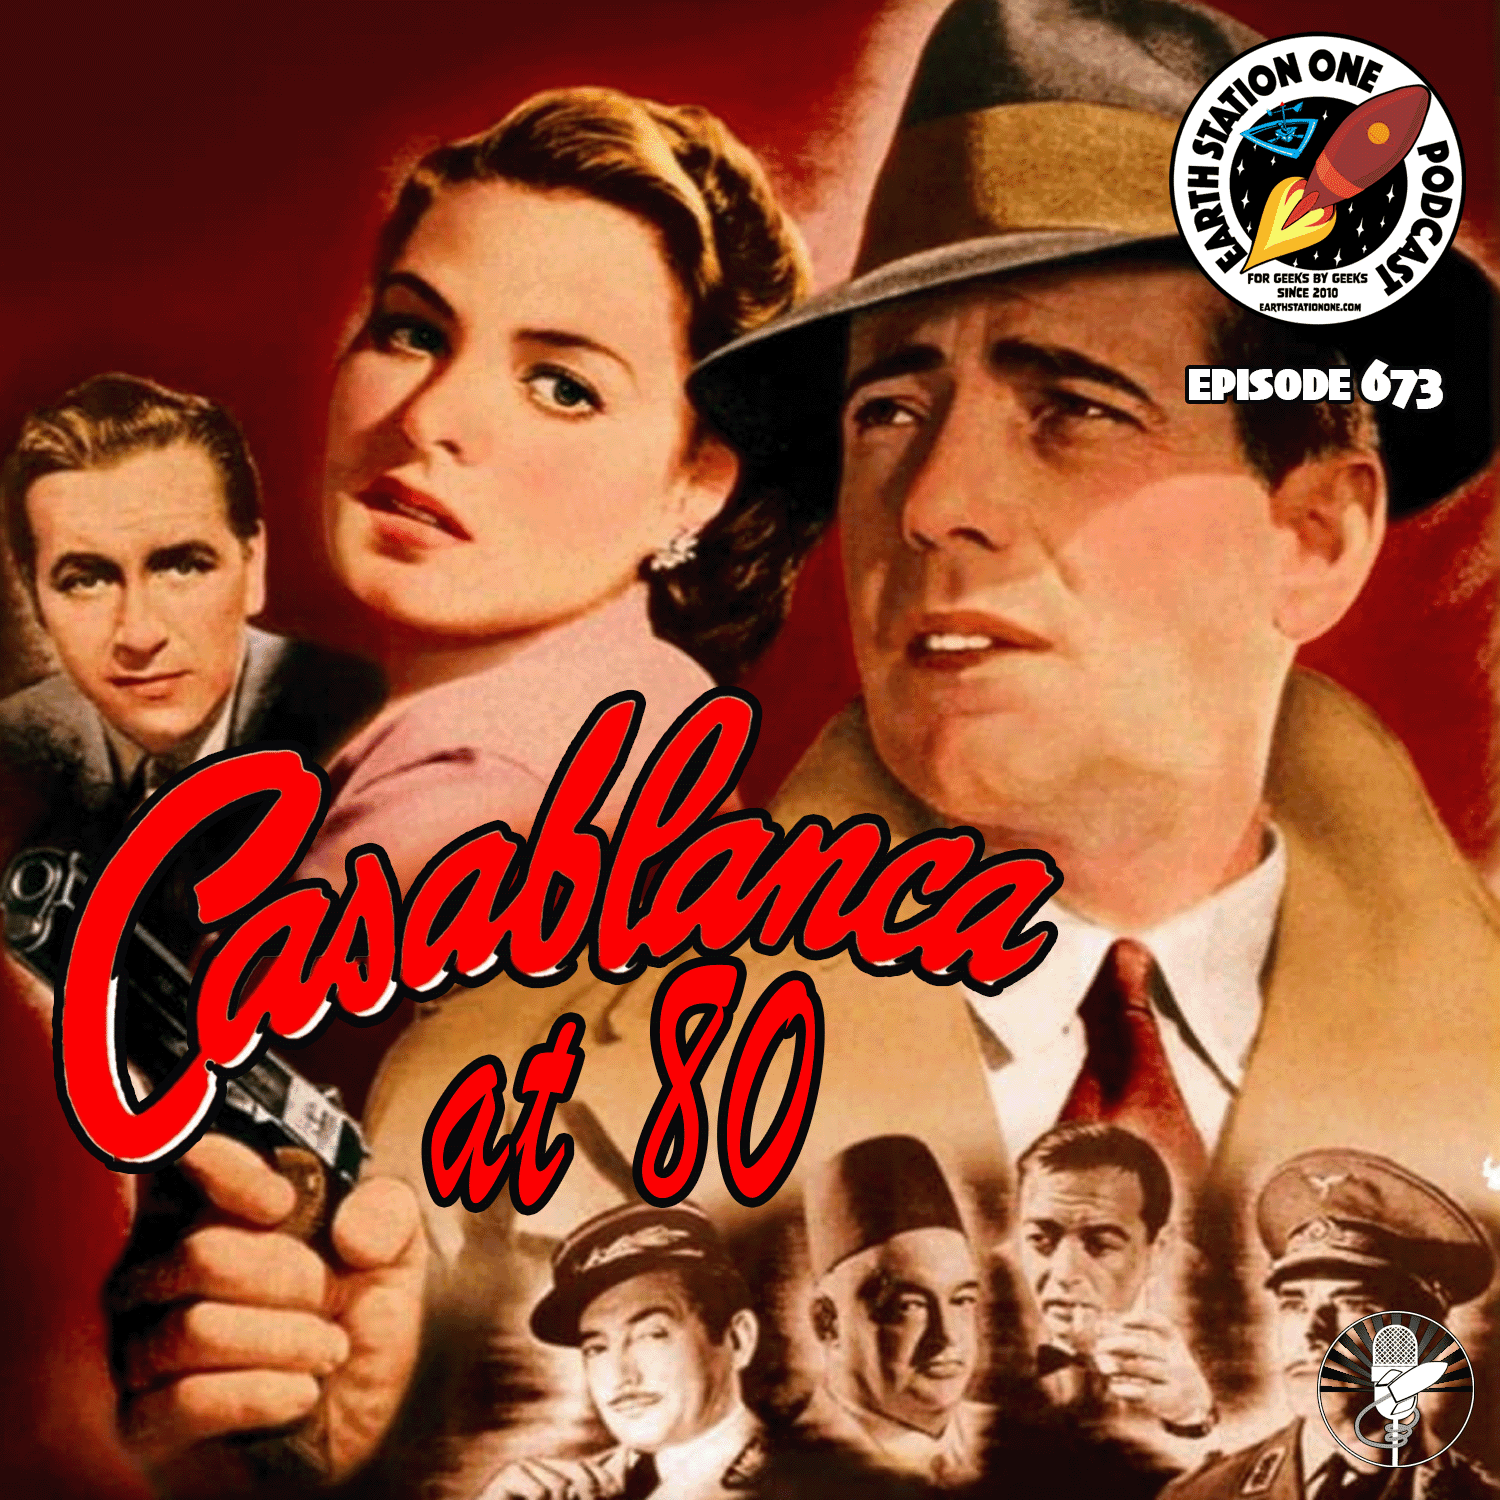 The Earth Station One Podcast Ep 673 - Here's Looking At Casablanca at 80